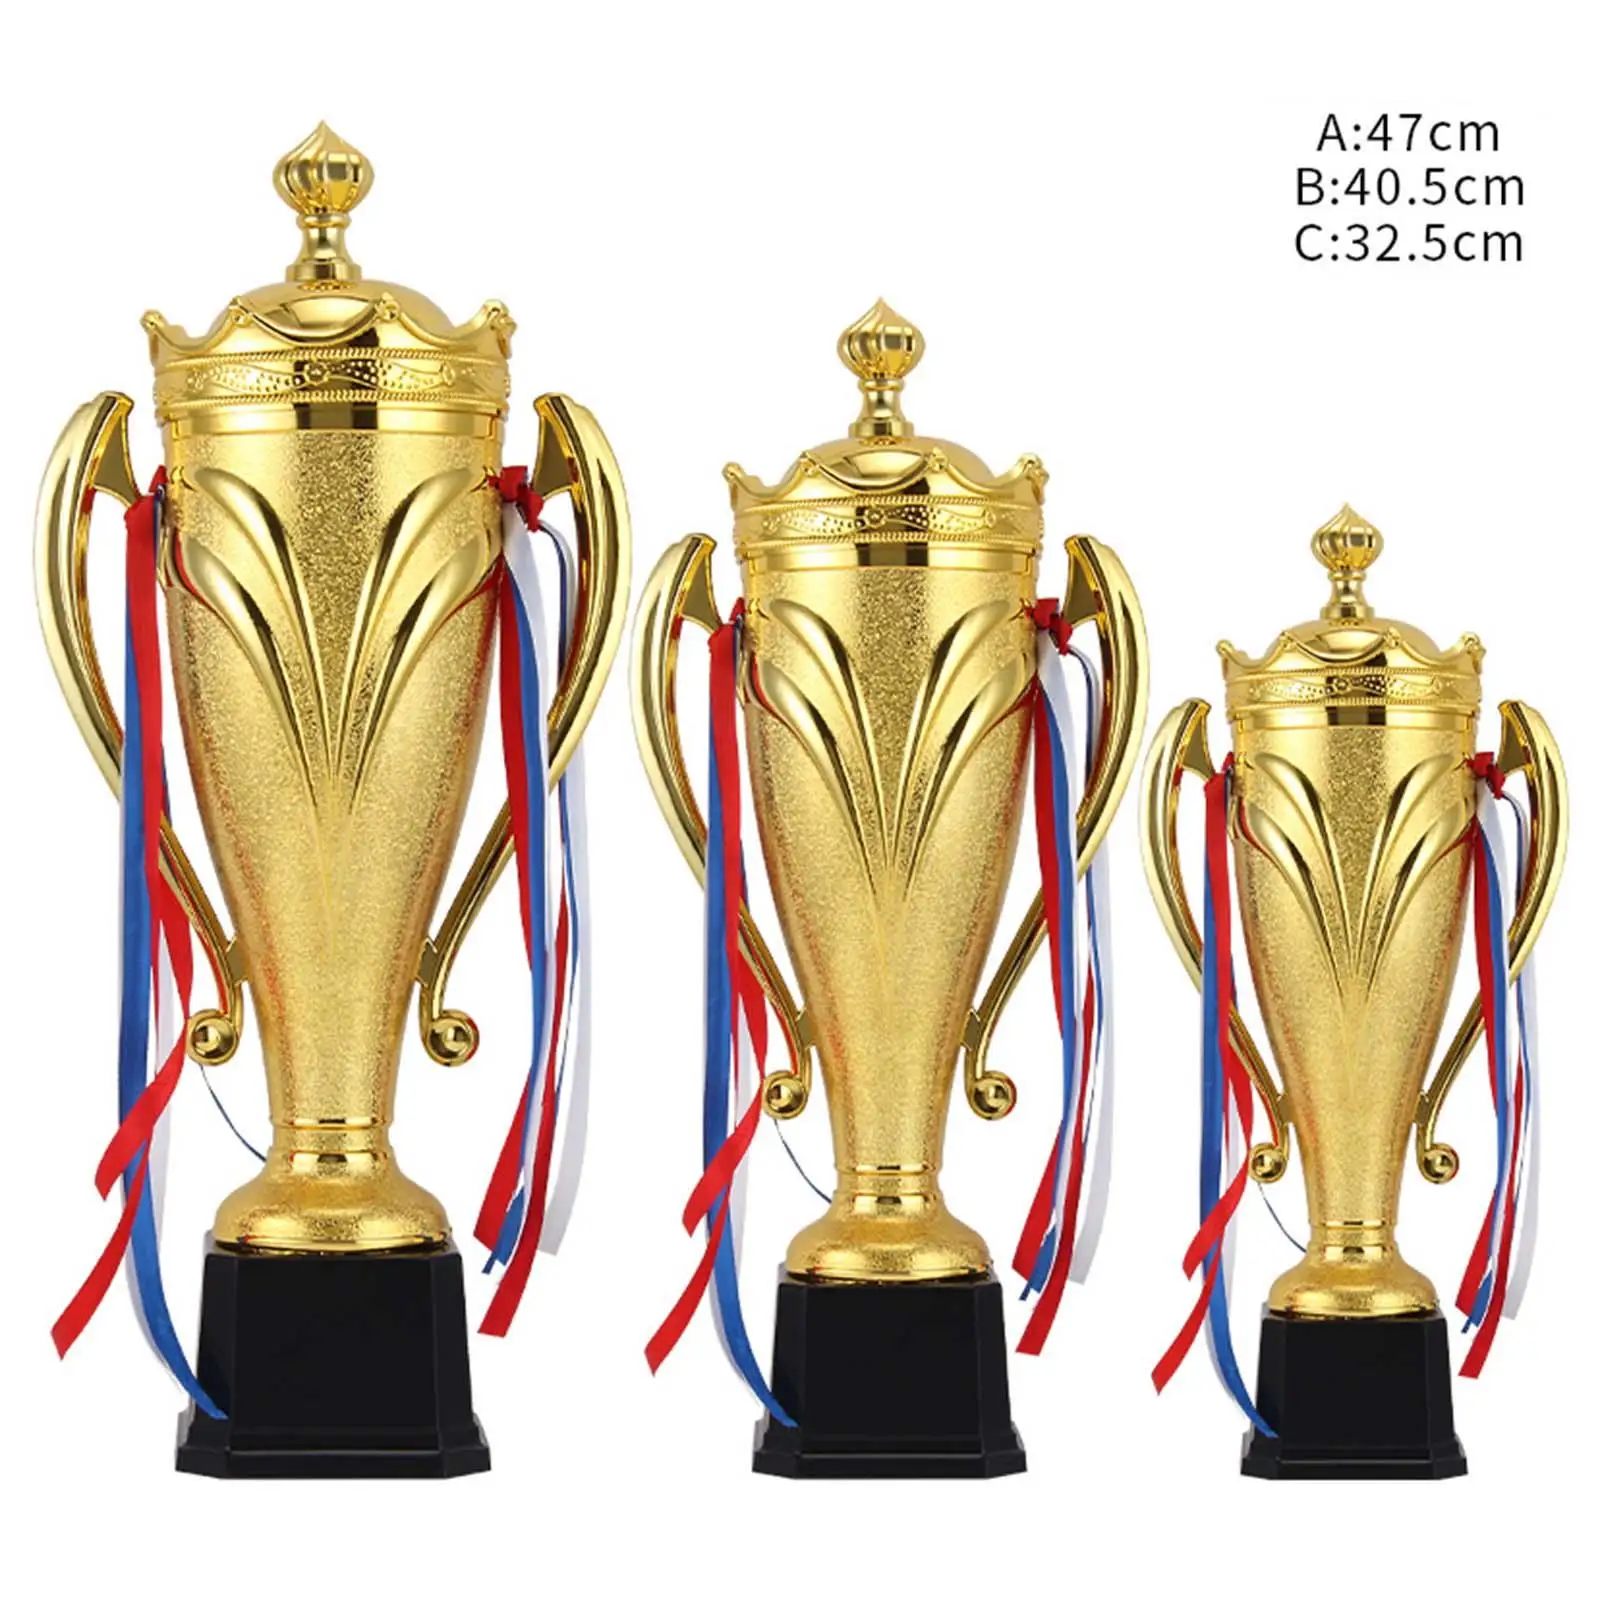 PP Material Winner Award Trophies Cup Gold Color Smooth Surface Multifunctional Party Favors Props Rewards Prizes for Ceremony